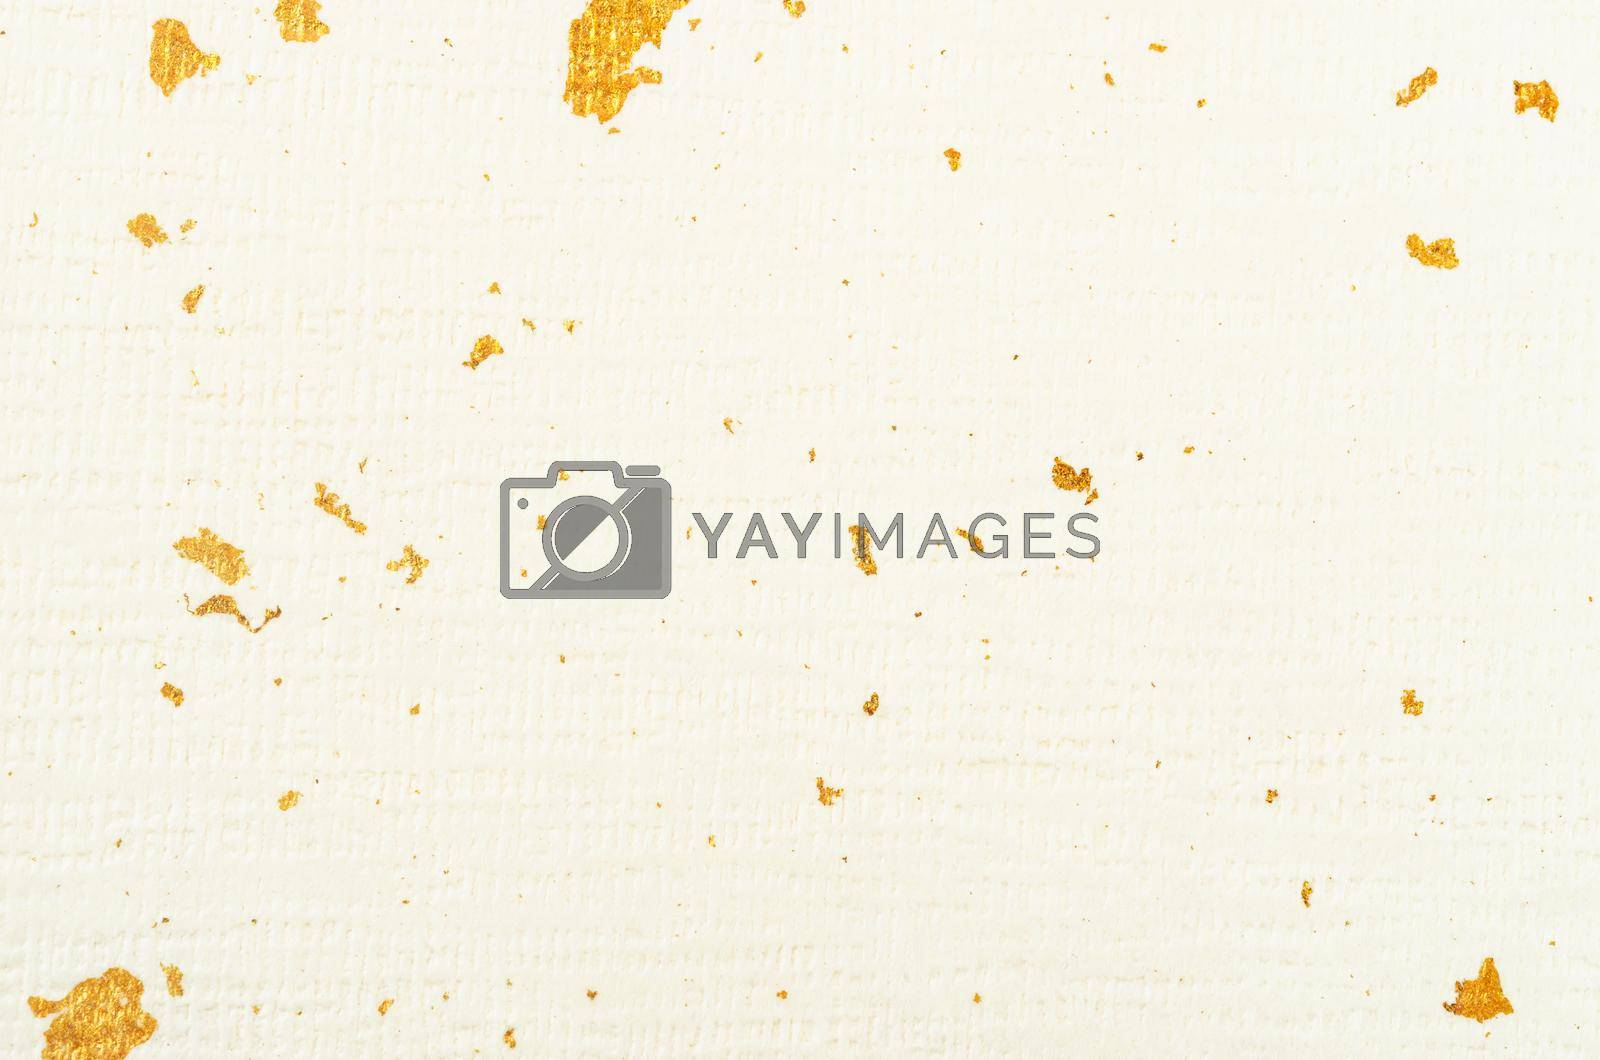 The Paper with gold sheet texture as background.